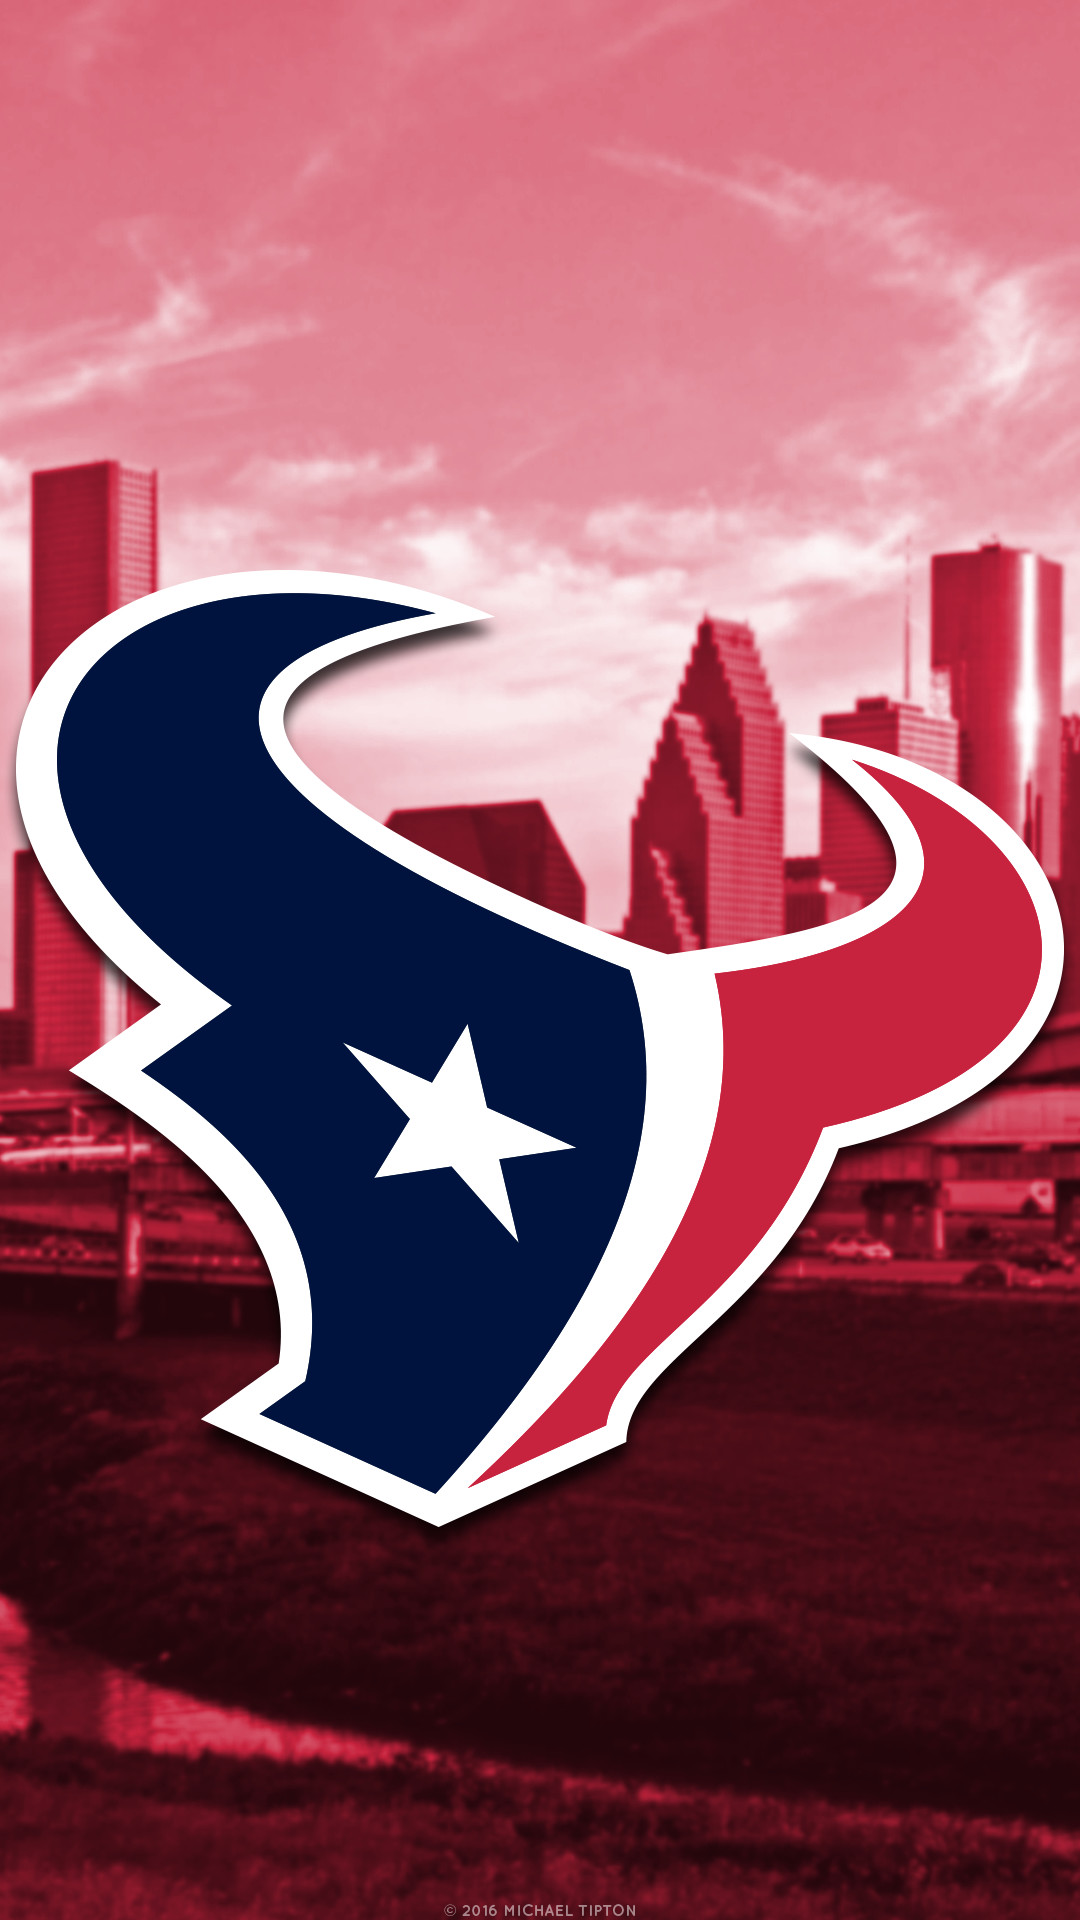 Nfl houston texans city logo iphone android background